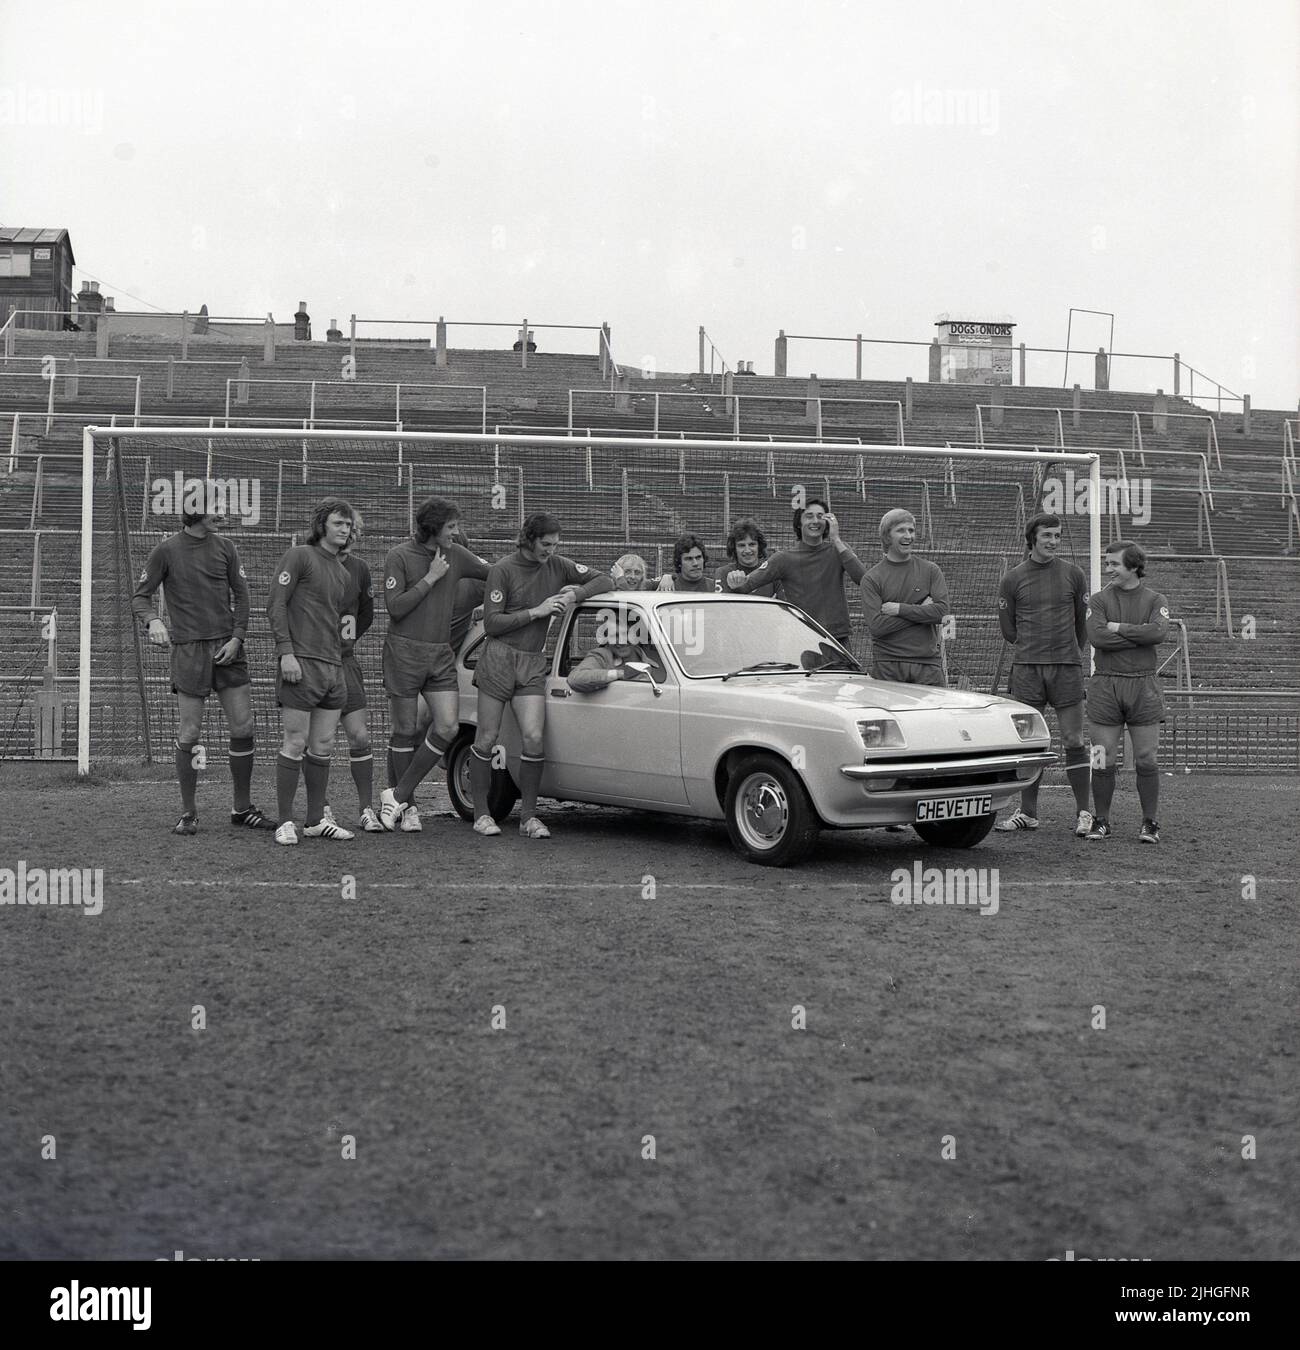 1974, historical, football manager, Malcolm Allison sitting in 2-door Chevette hatchback car on the pitch at Selhurst Park, with team players standing around. Selhurst Park is the home of Crystal Palace Football Club. A wooden hut on top of banked terraces says Police Post. A smaller on, a food stall, says Dogs & Onions. Stock Photo